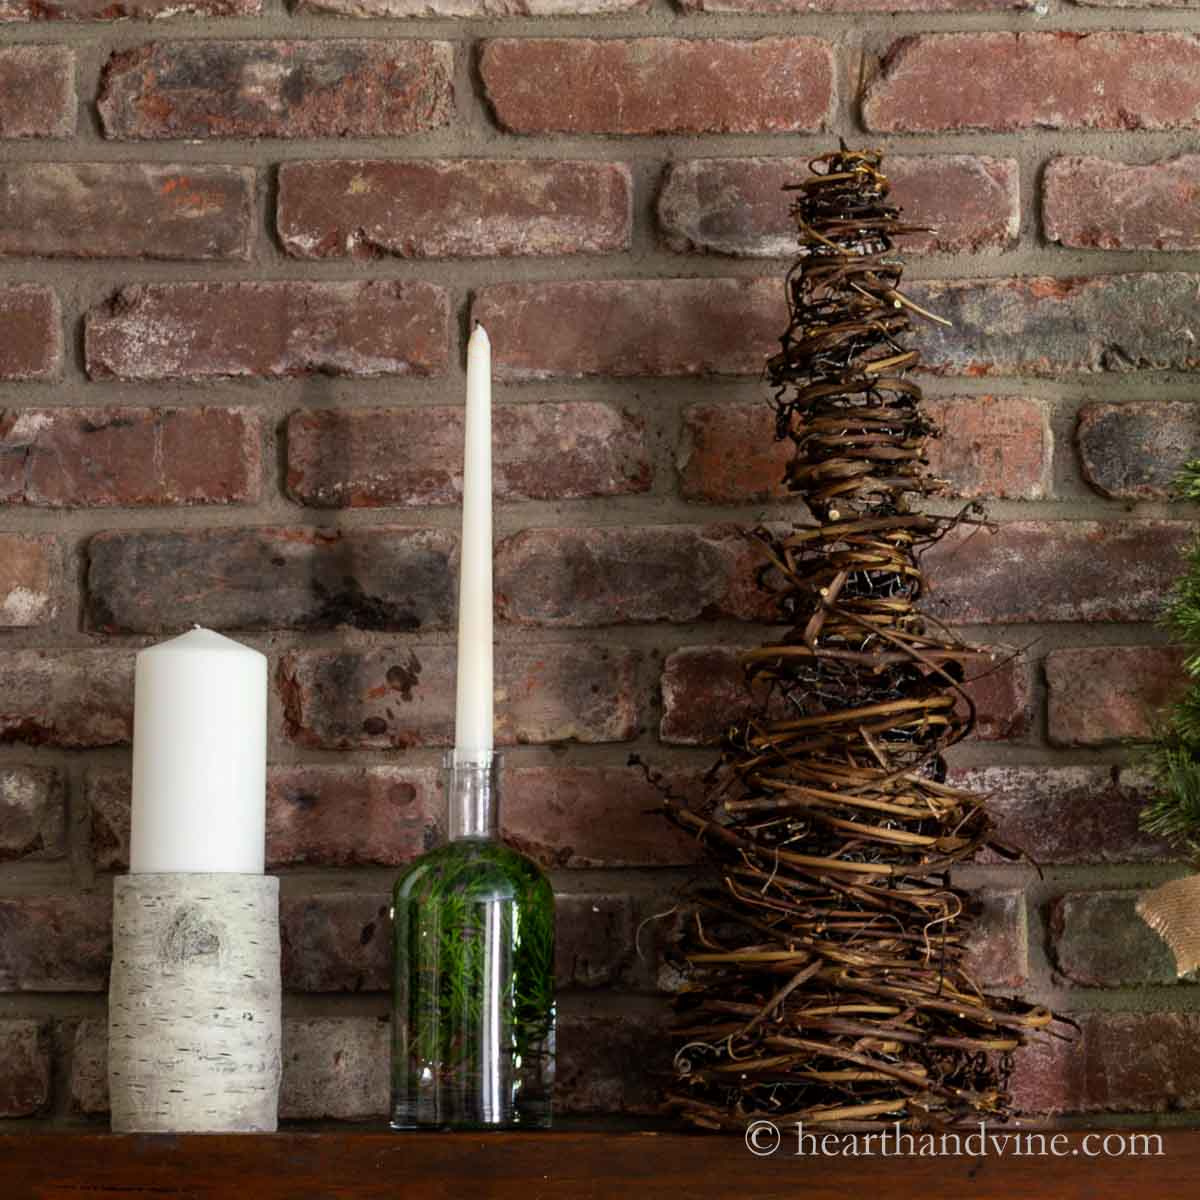 Cone shaped grapevine tree on a mantel with candles.